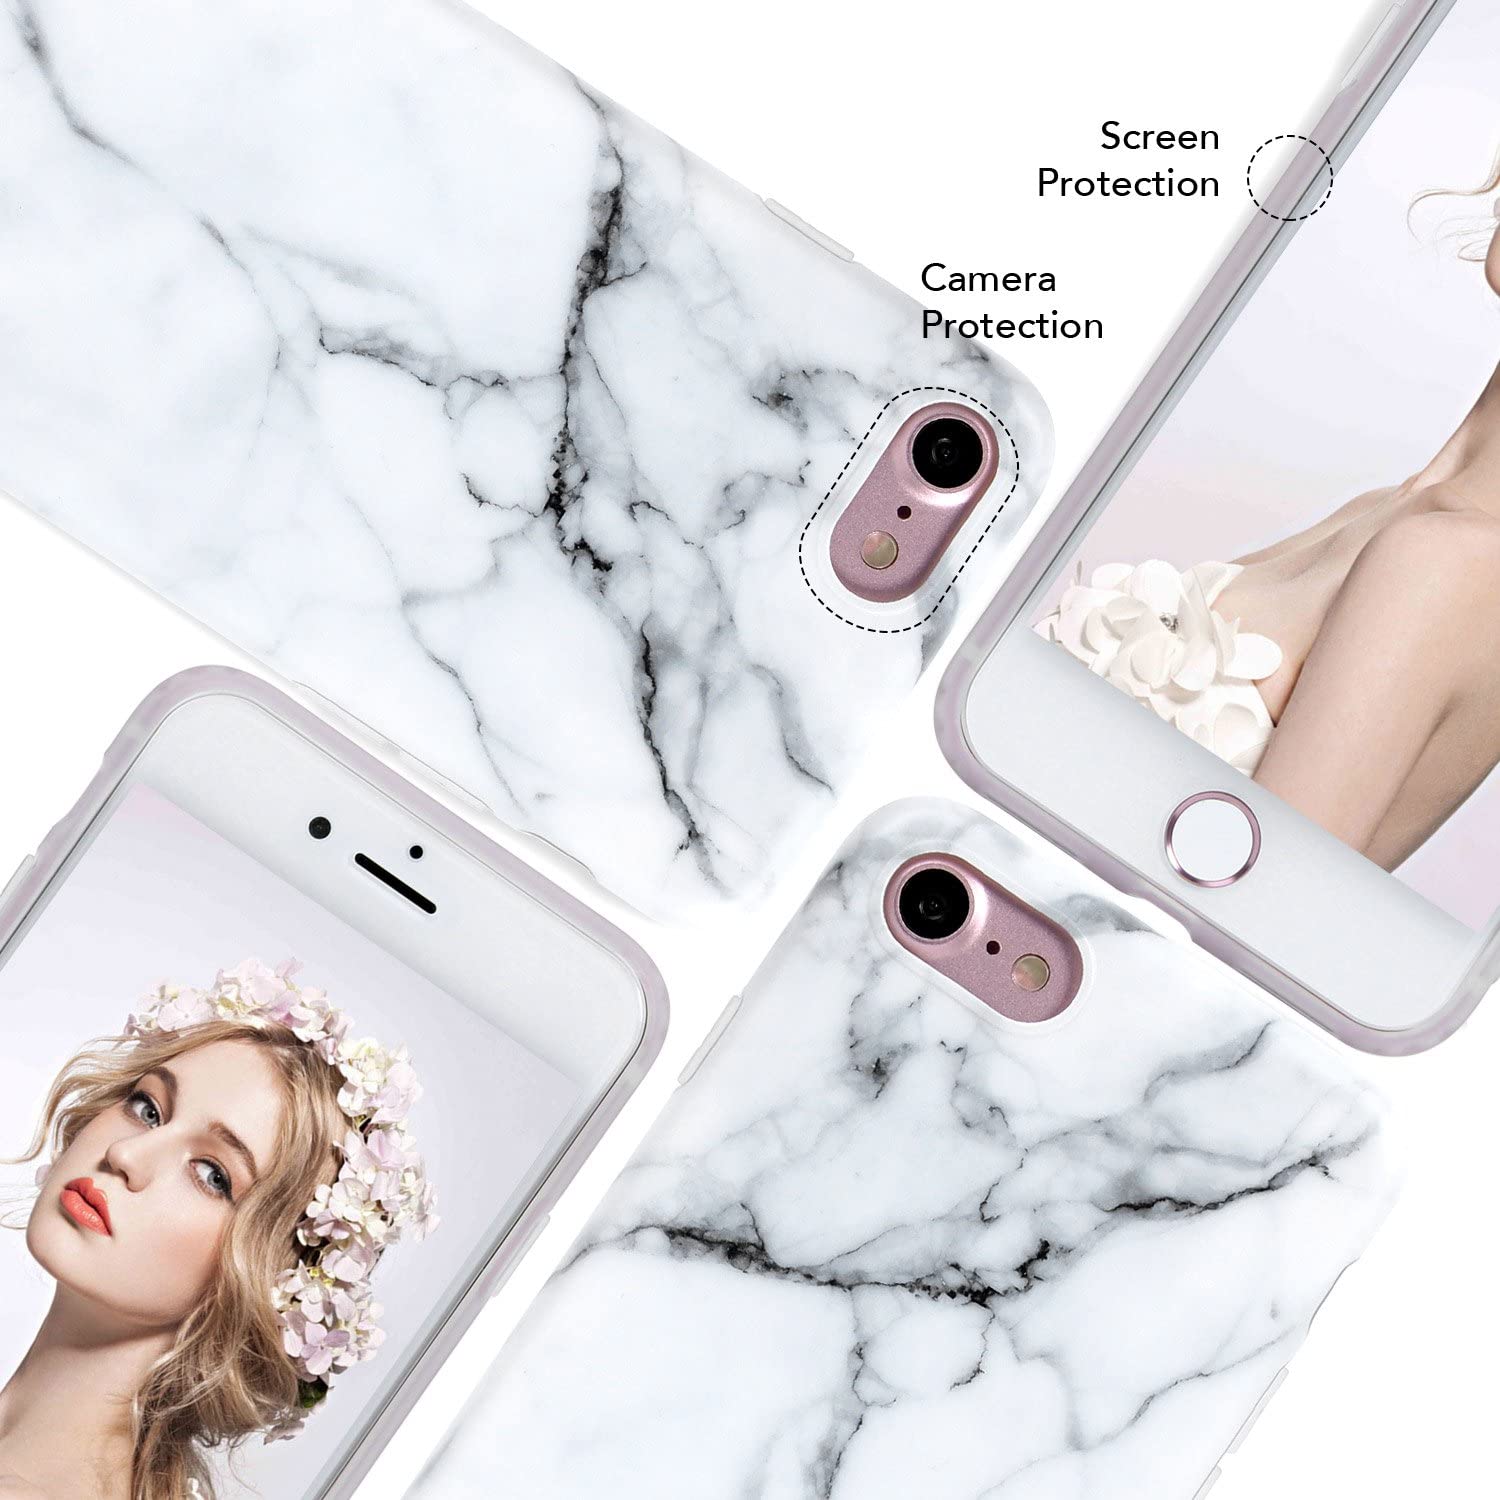 Apple iPhone SE 2022 Case White Marble Slim Anti-Scratch Shockproof Cover Glossy Flexible Clear Transparent TPU Soft Case